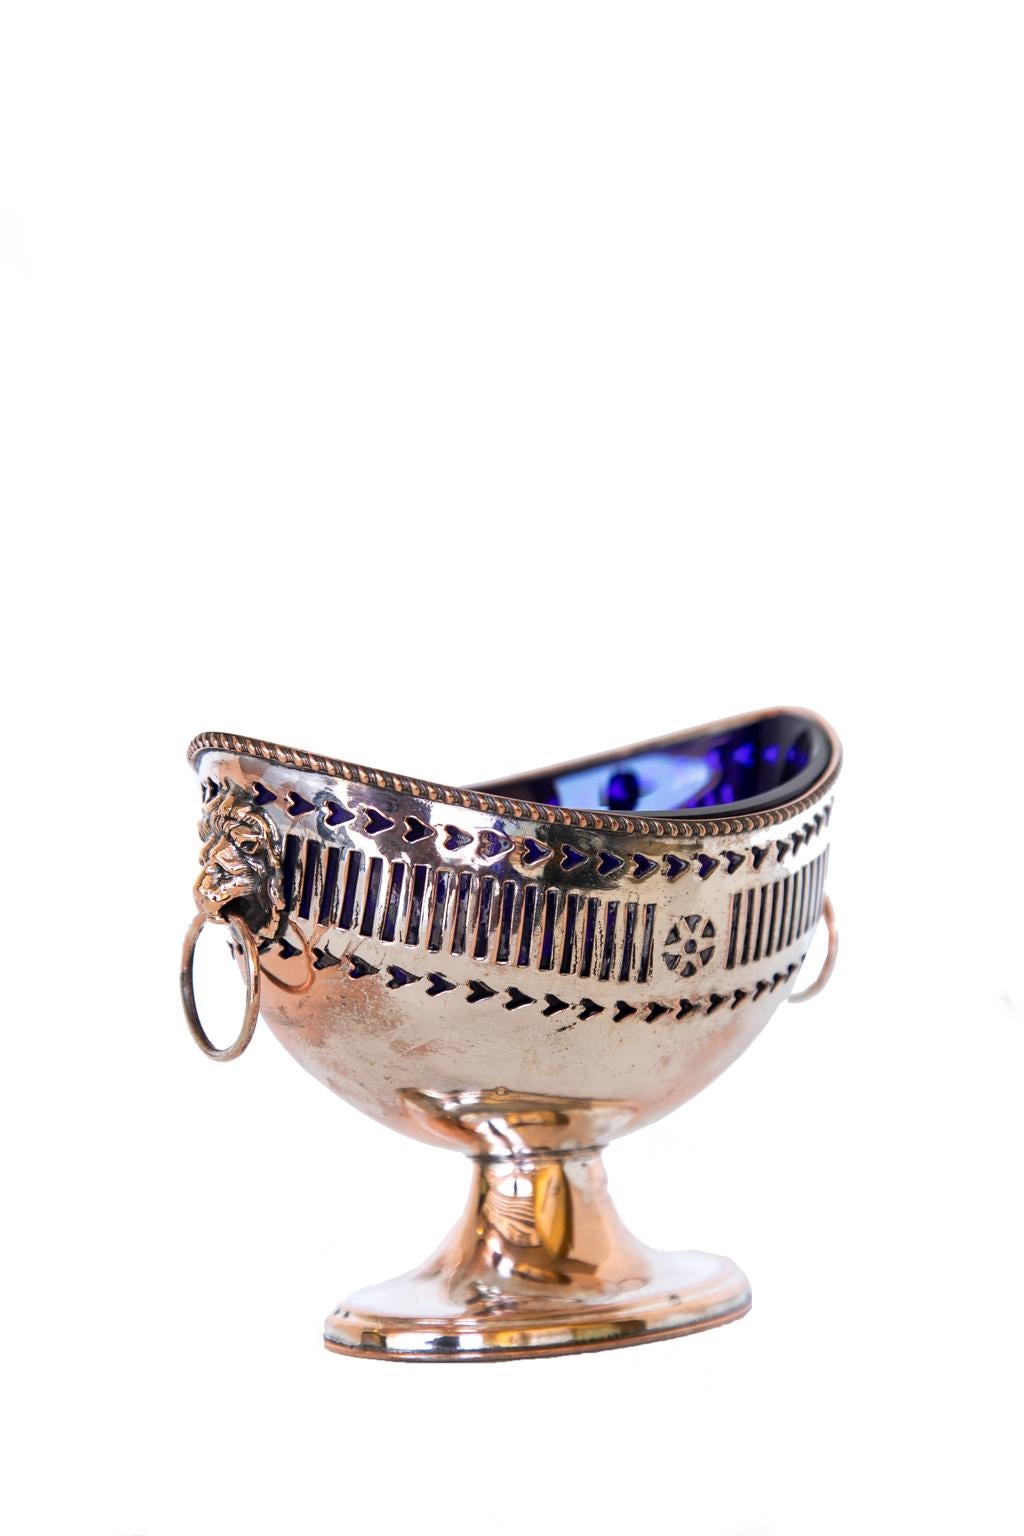 English Sheffield Master salt cellar, with the outer shell having a reticulated body with lion head pull handles. The liner is hand blown cobalt blue. The silver has some worn areas.
 